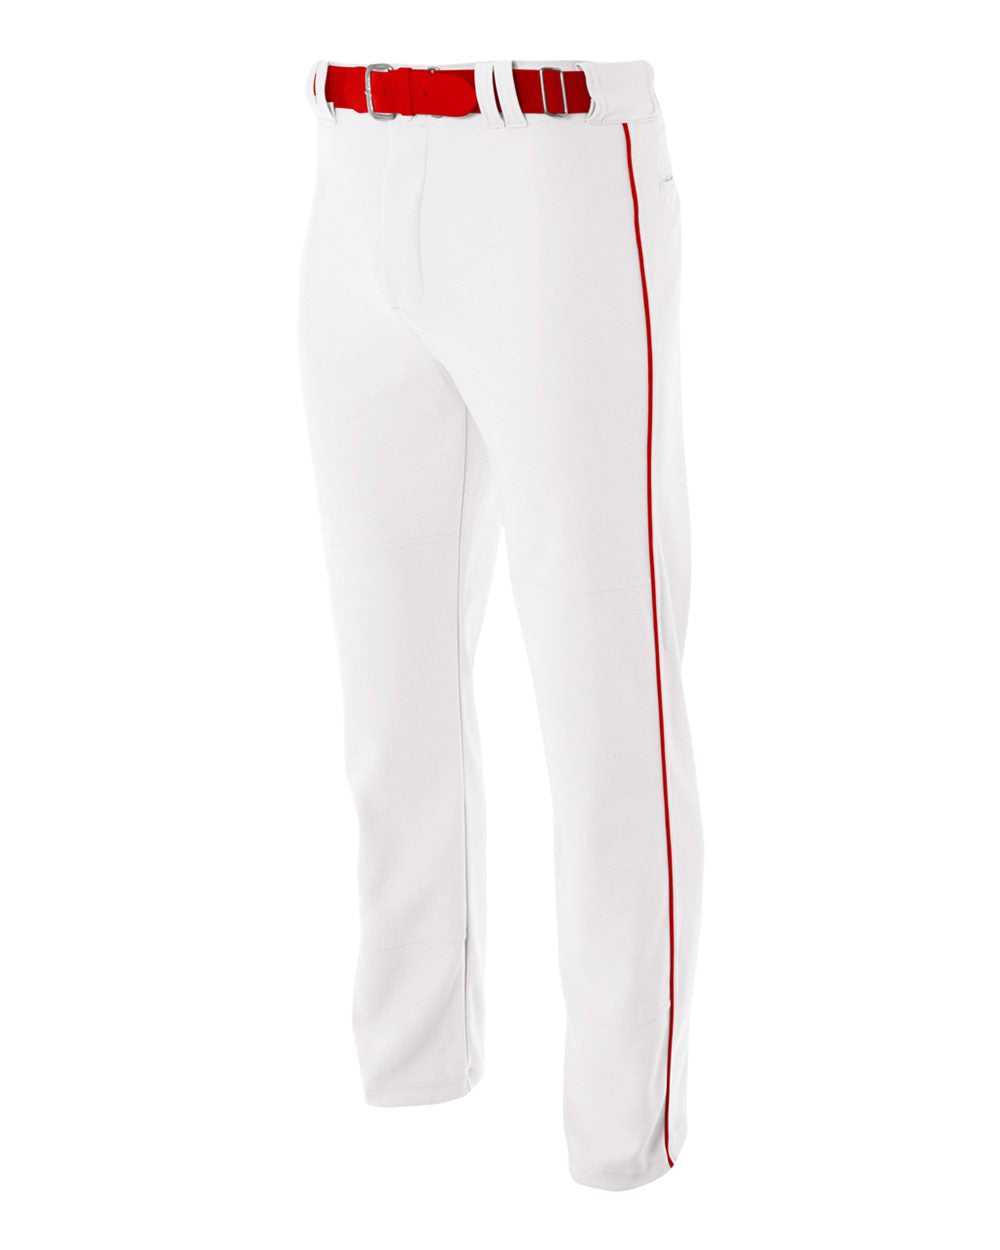 A4 NB6162 Youth Pro Style Open Bottom Baggy Cut Baseball Pant - White Scarlet - HIT a Double